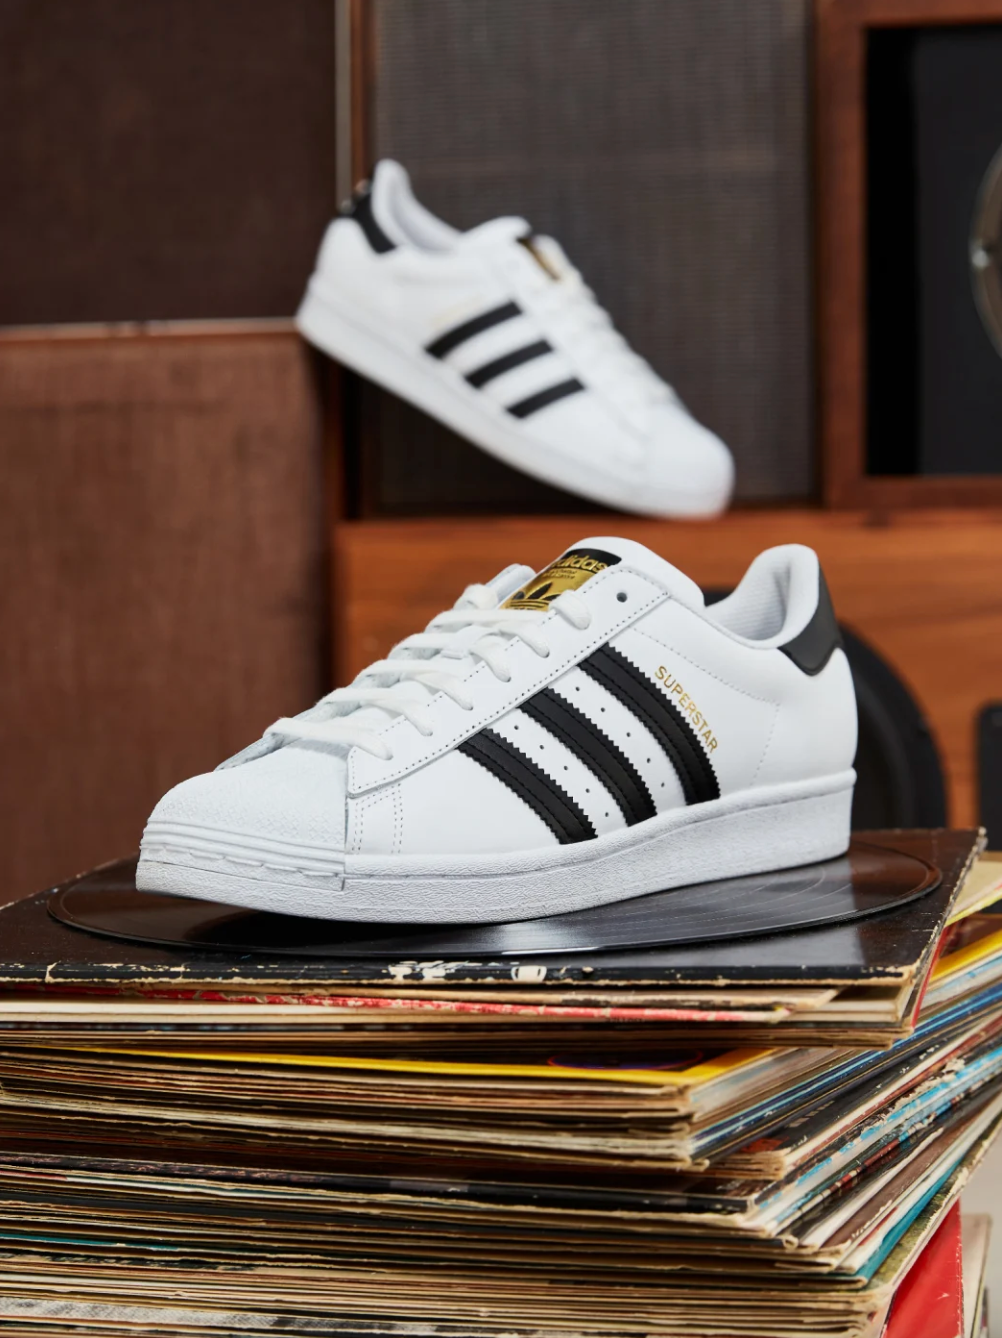 adidas Sportswear Shoes & Clothes in Unique Offers